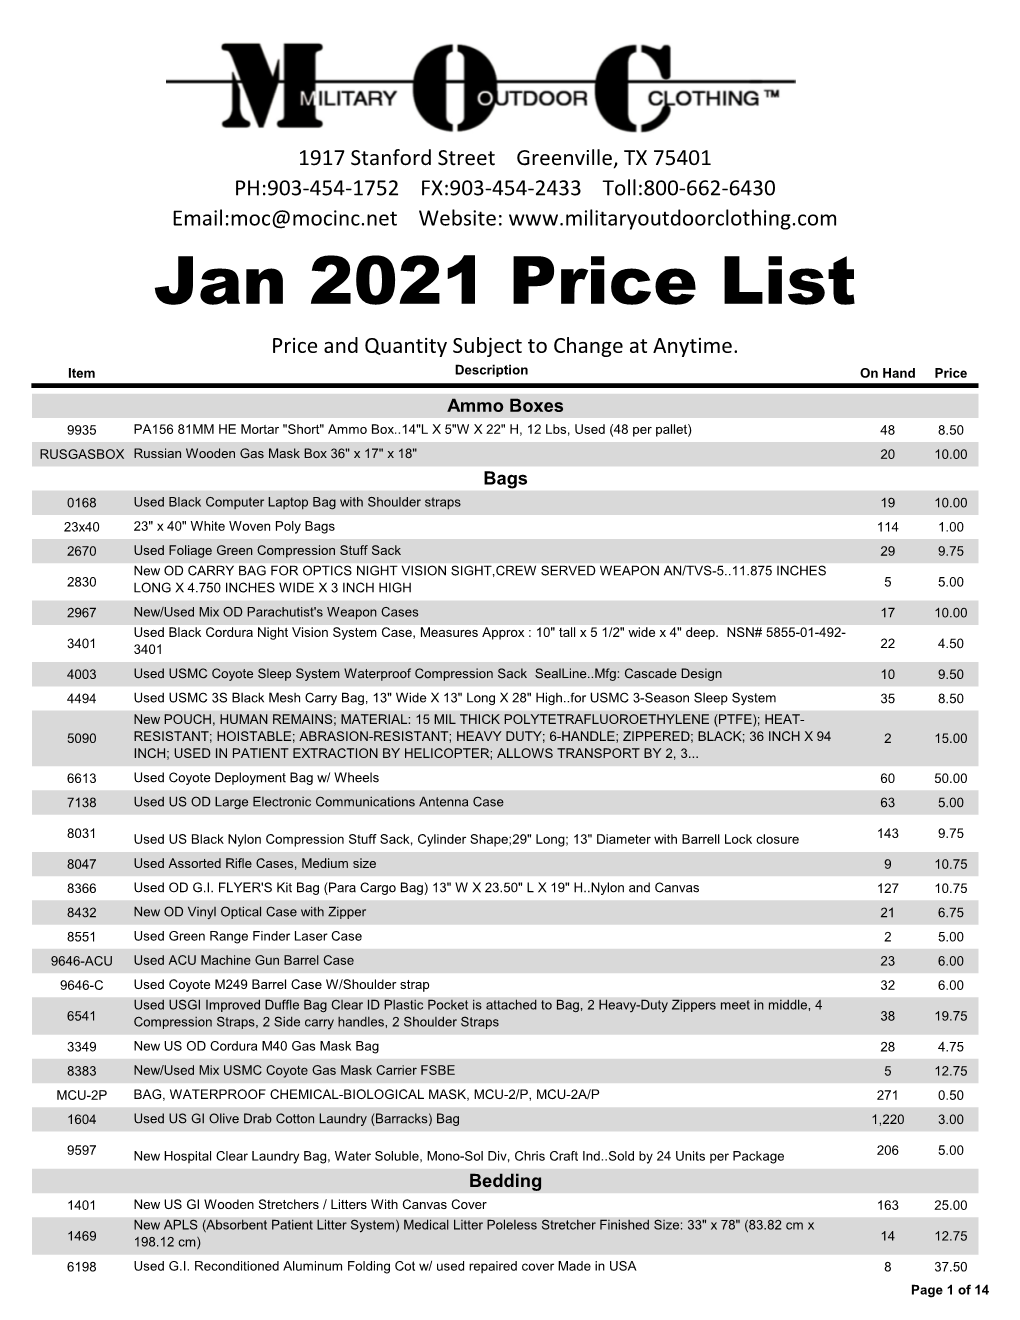 Jan 2021 Price List Price and Quantity Subject to Change at Anytime